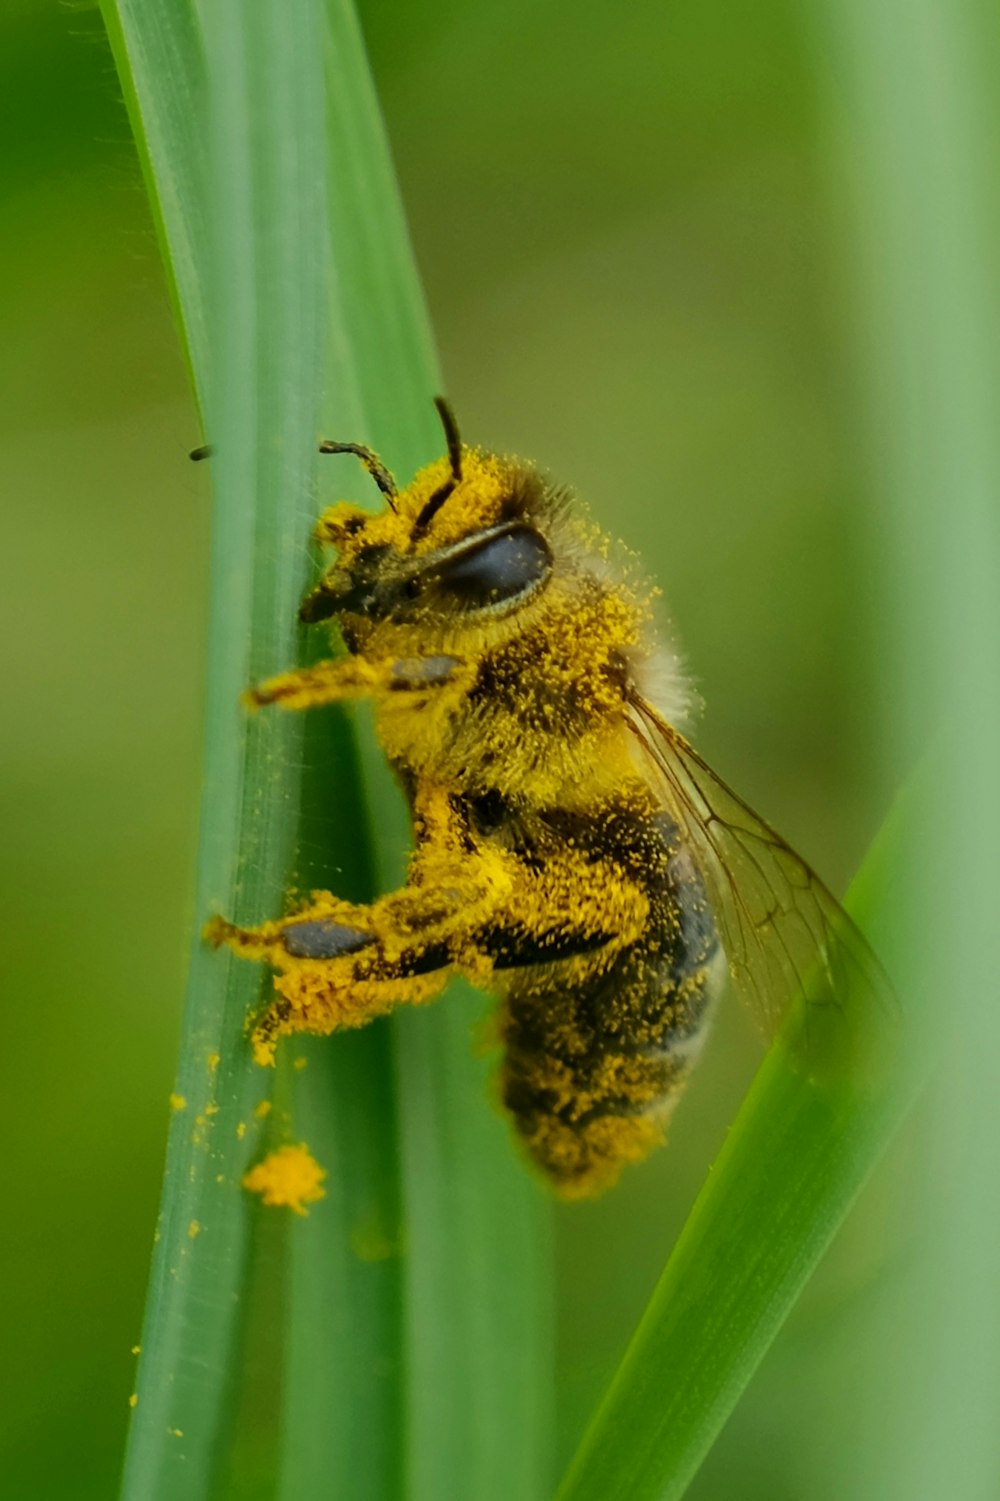 a close up of a bee on a plant